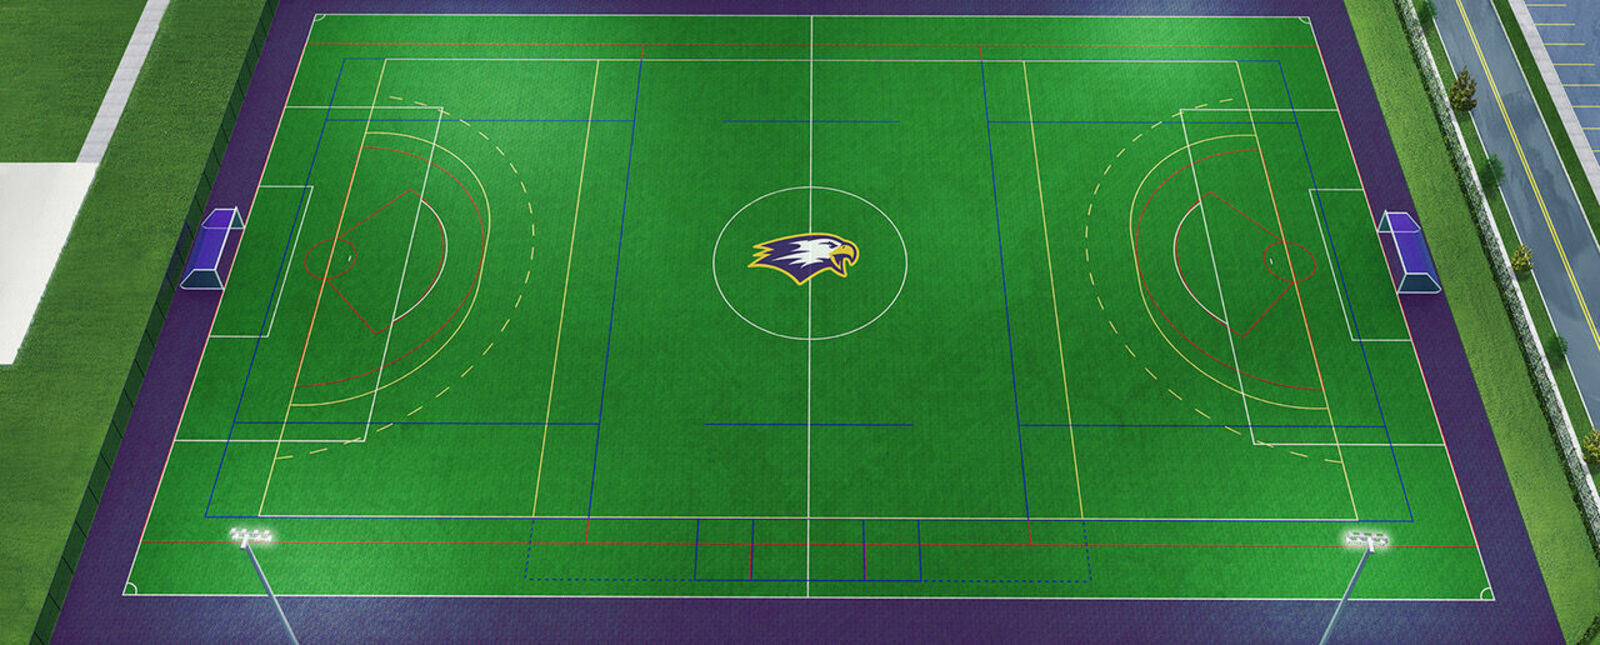 An artist rendering of the proposed turf field at Elmira College